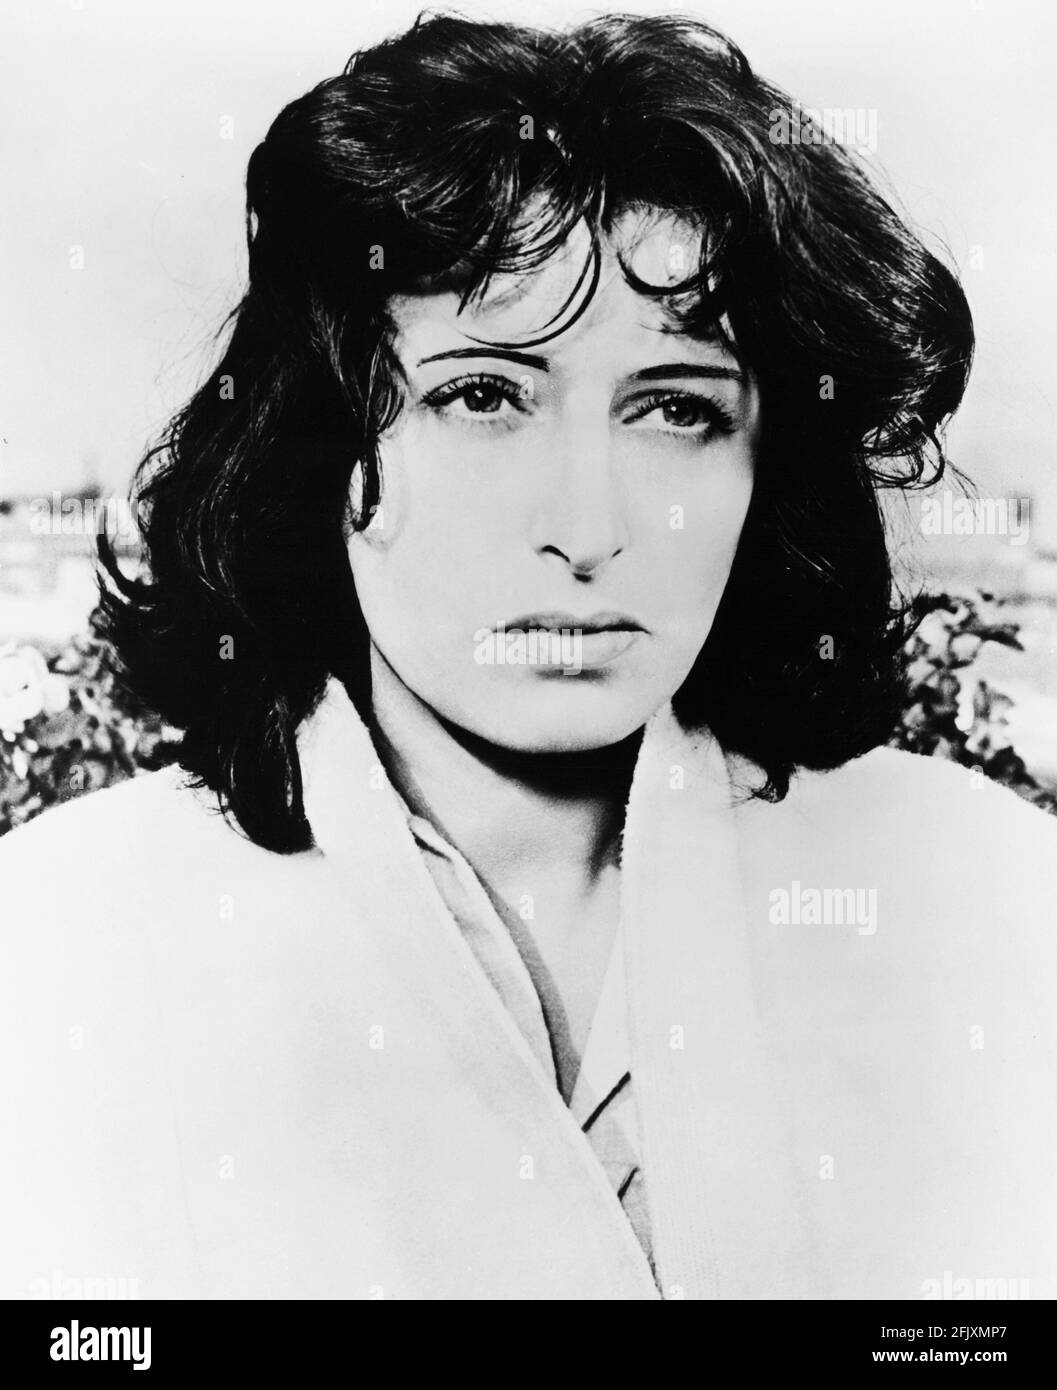 1958 , USA : The italian movie actress ANNA  MAGNANI   in  WILD IS THE WIND  ( Selvaggio è il vento )  by George Cukor , from the roman ' Furia ' by Vittorio Nino Novarese , Paramount Pictures  - CINEMA - FILM - attrice  ----   Archivio GBB Stock Photo